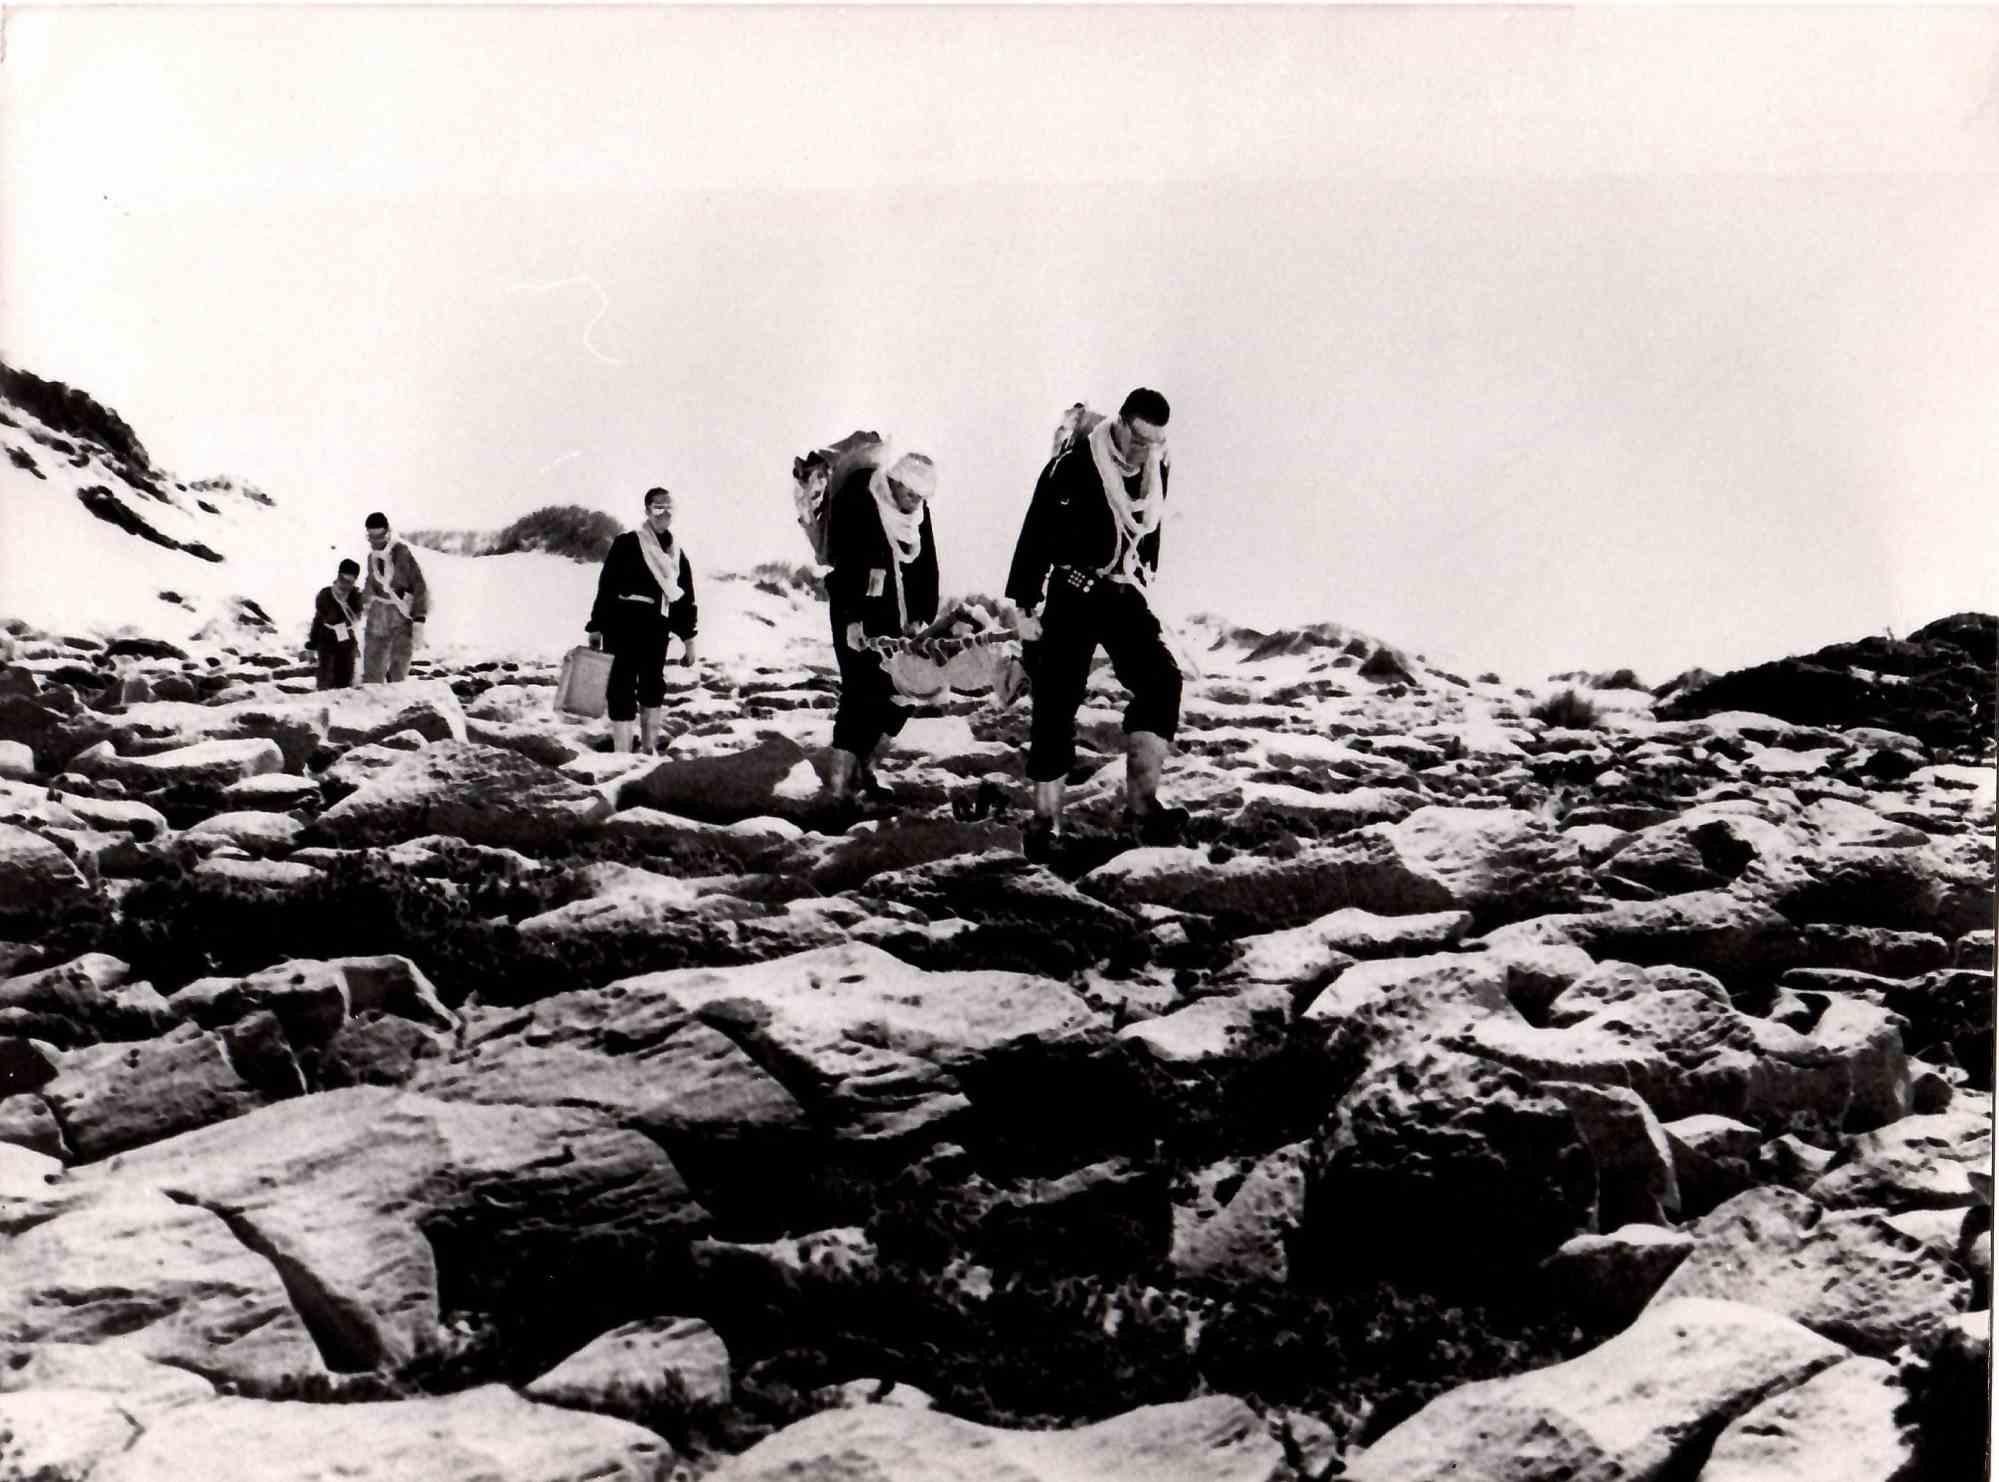 Unknown Figurative Photograph - Among the Rocks, Vintage Photograph - Mid-20th Century